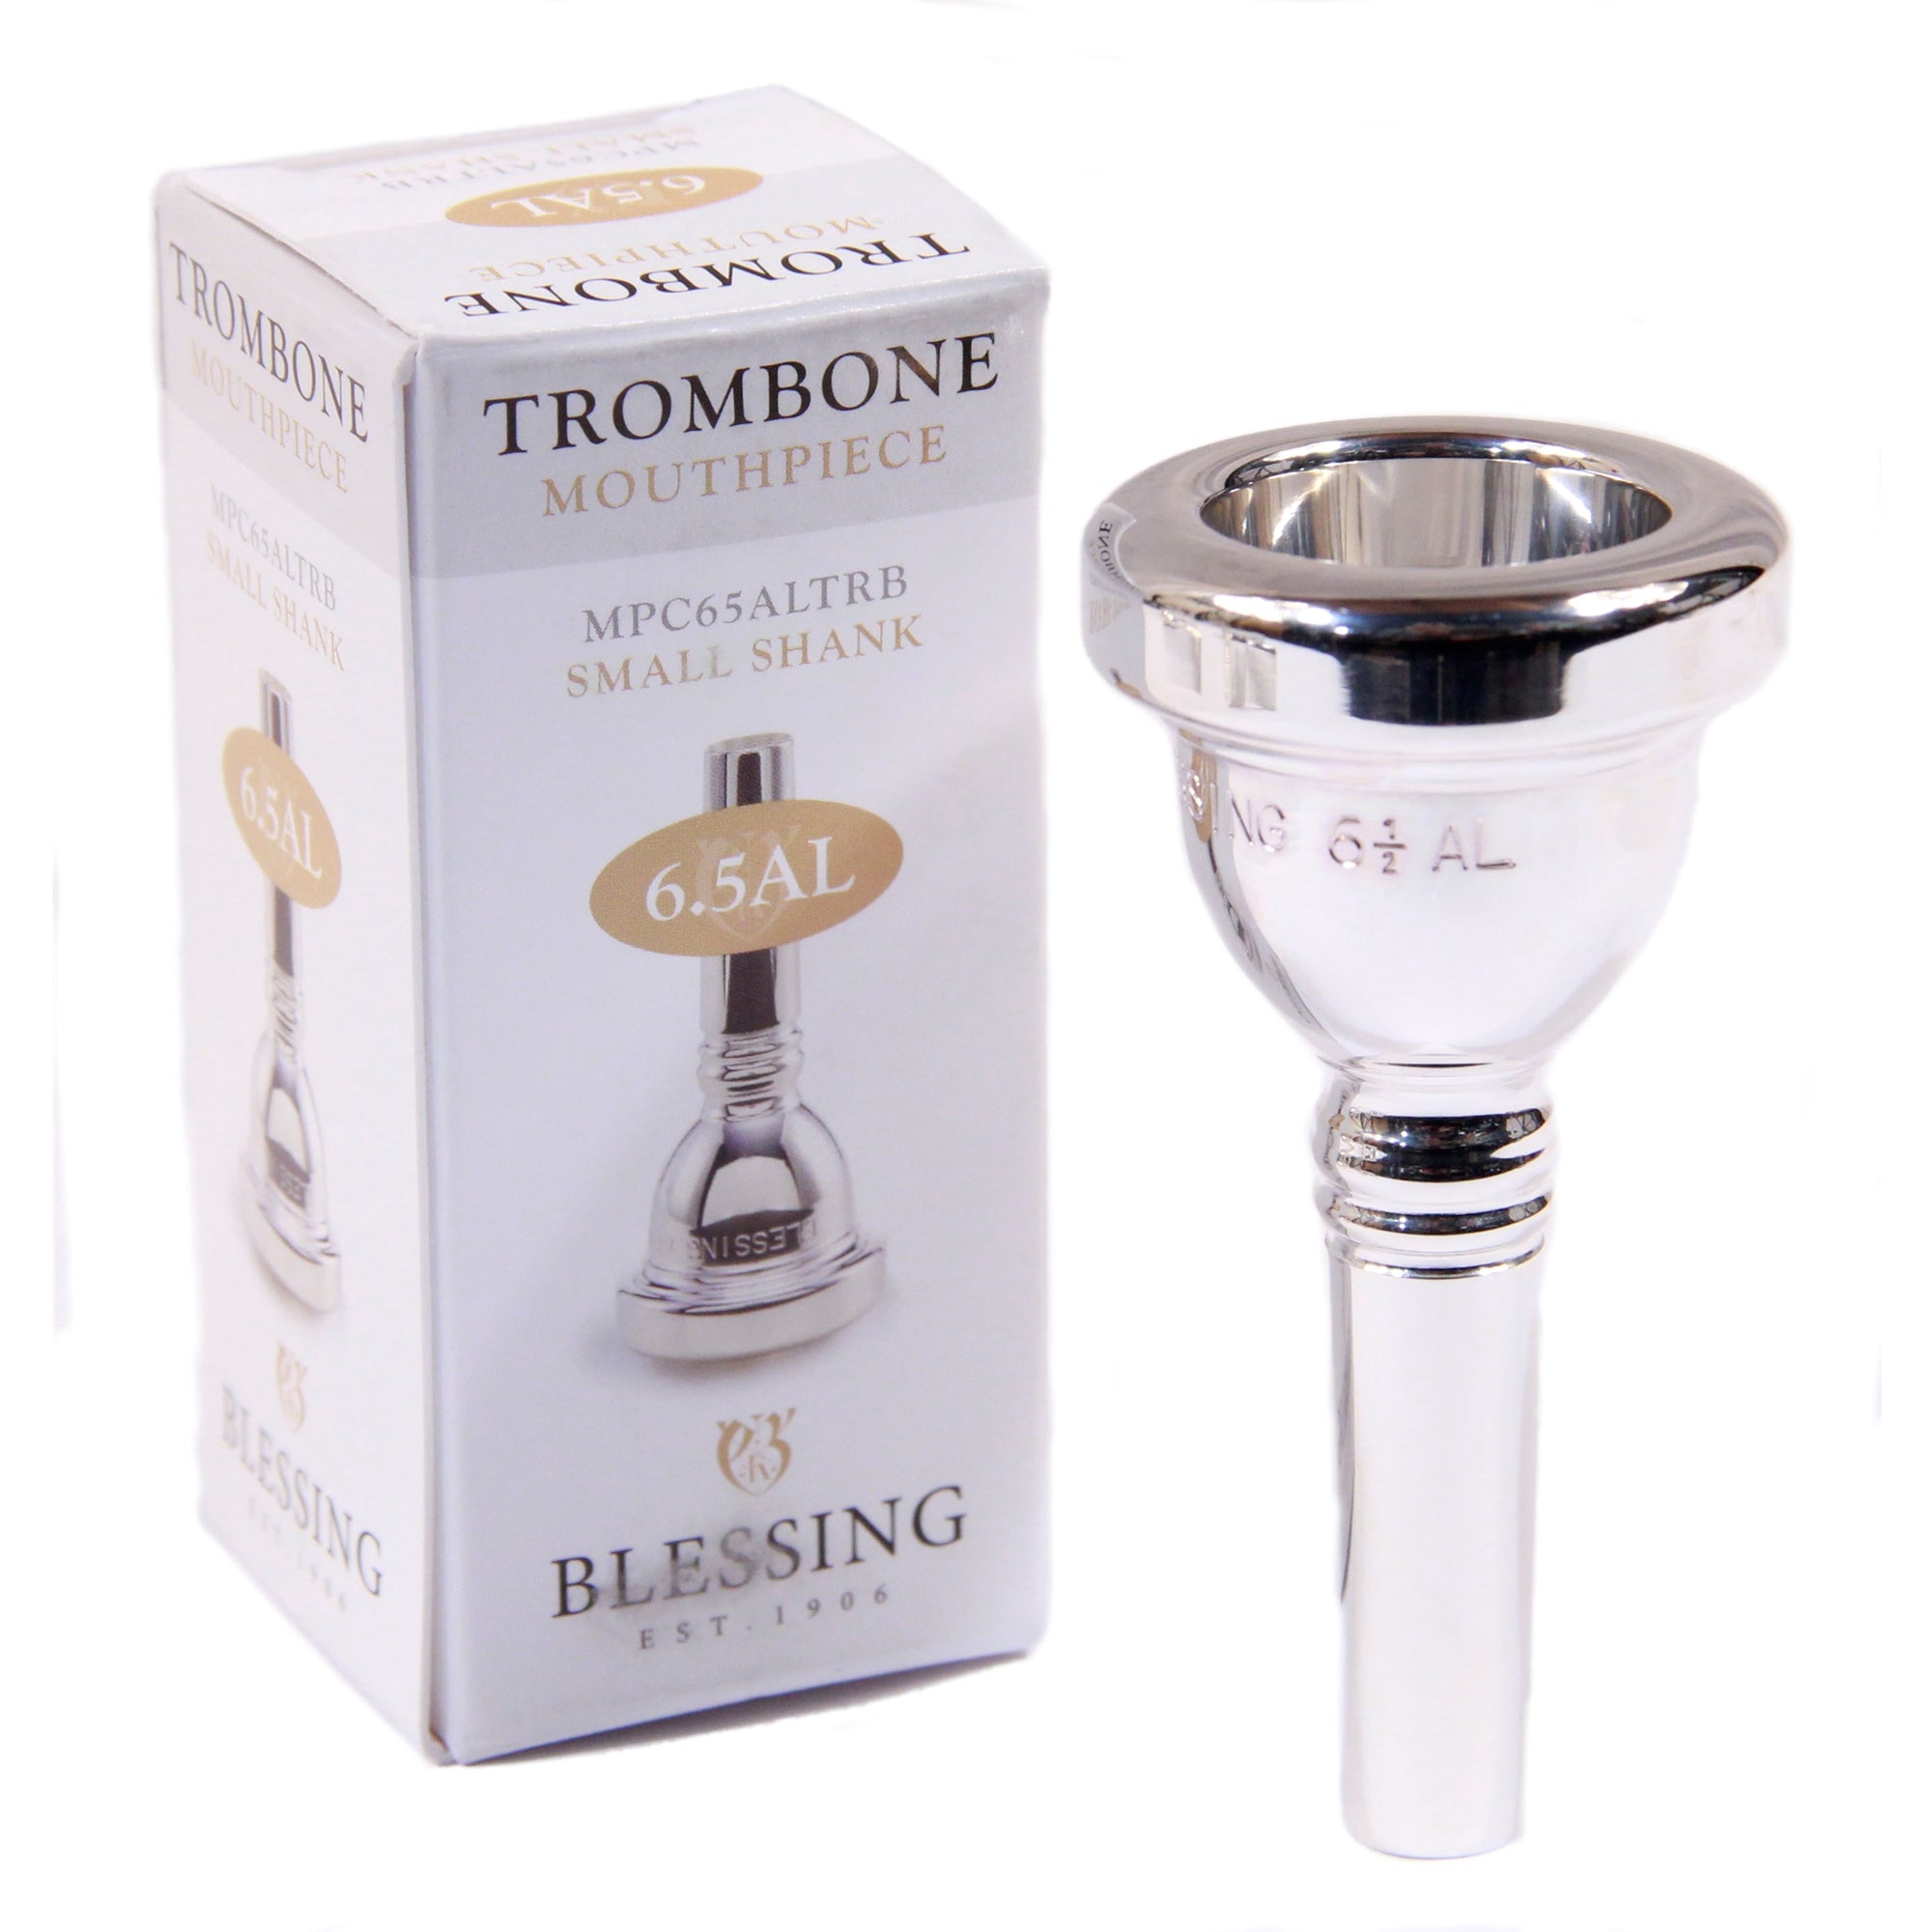 Blessing MPC65ALTRB 6.5AL Trombone Mouthpiece, Small Shank